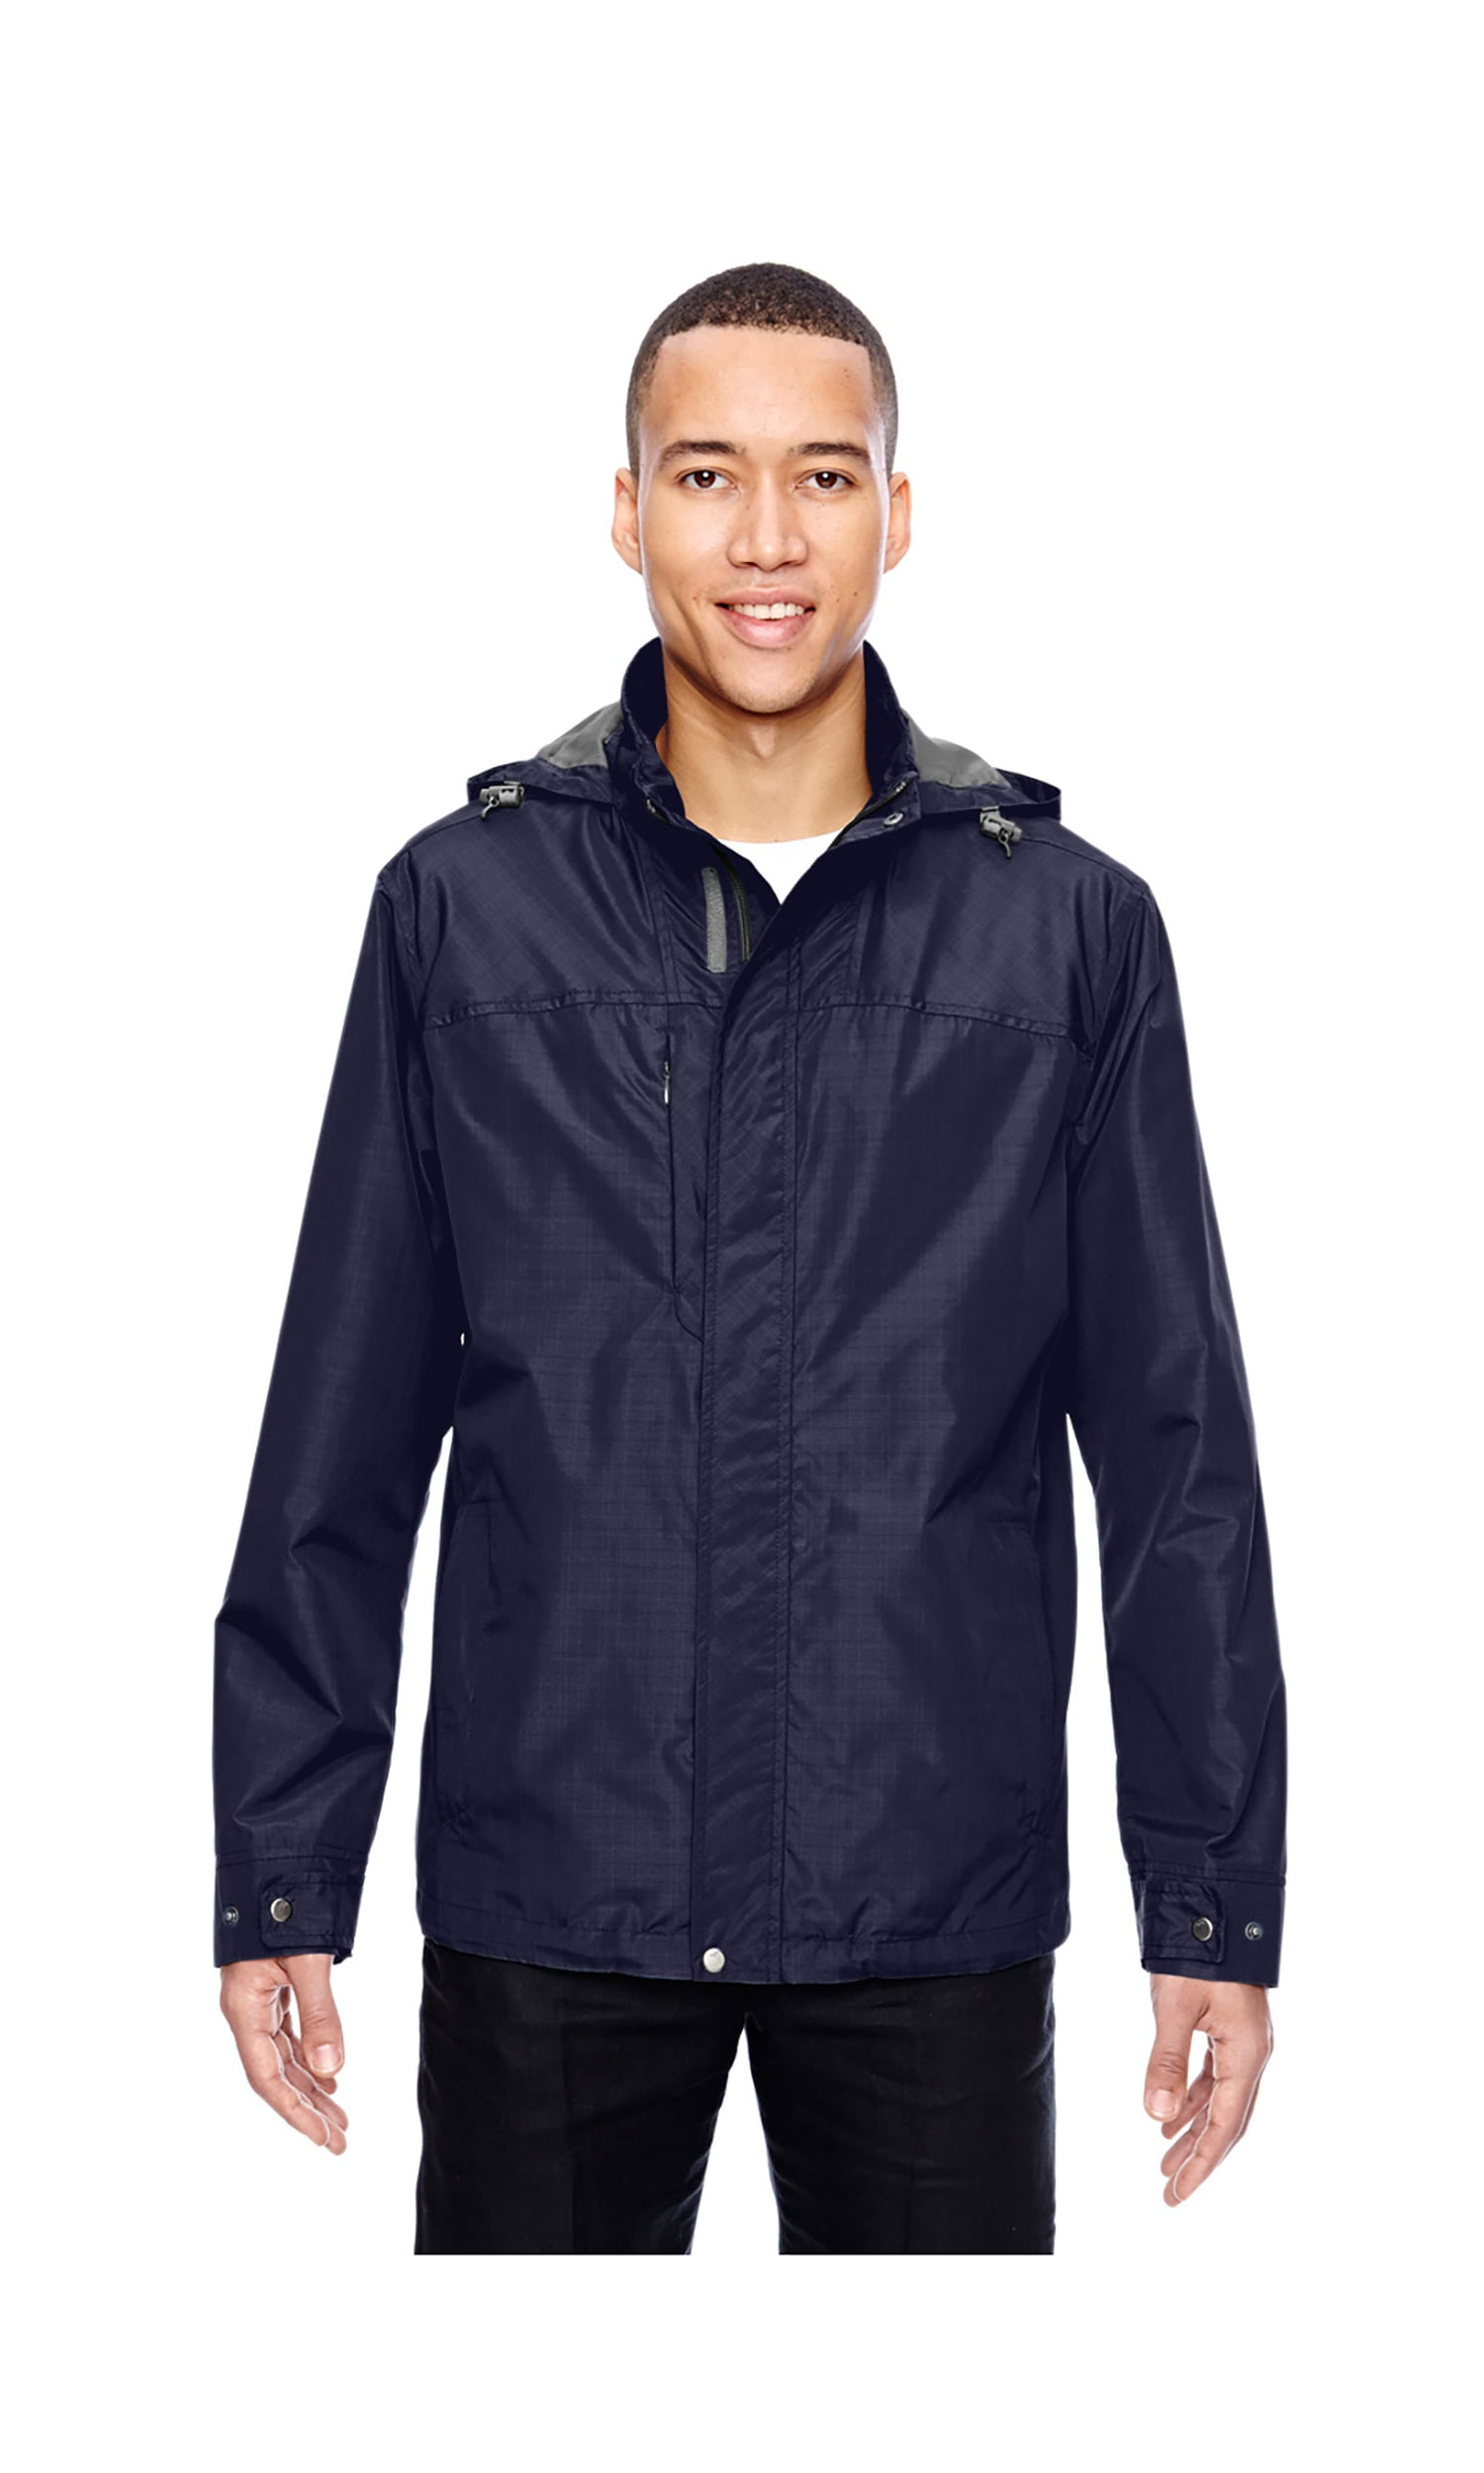 North End Men's Lightweight Jacket with Pattern, Style 88216 - Walmart.com